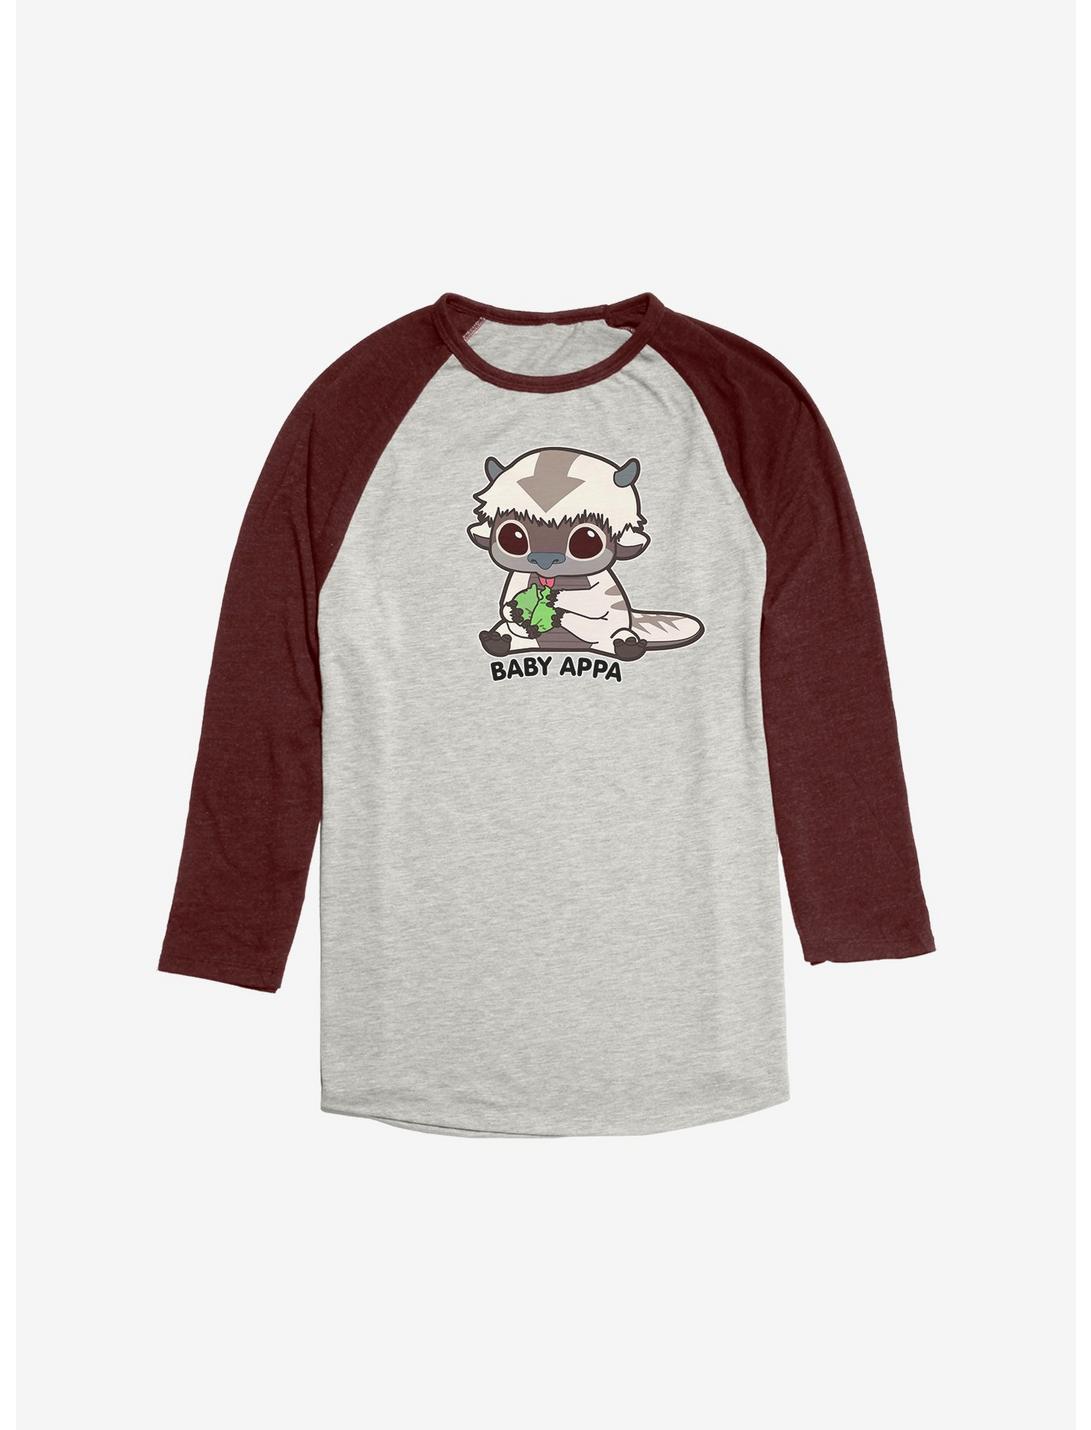 Avatar: The Last Airbender Cute Baby Appa Raglan - BoxLunch Exclusive, Oatmeal With Maroon, hi-res